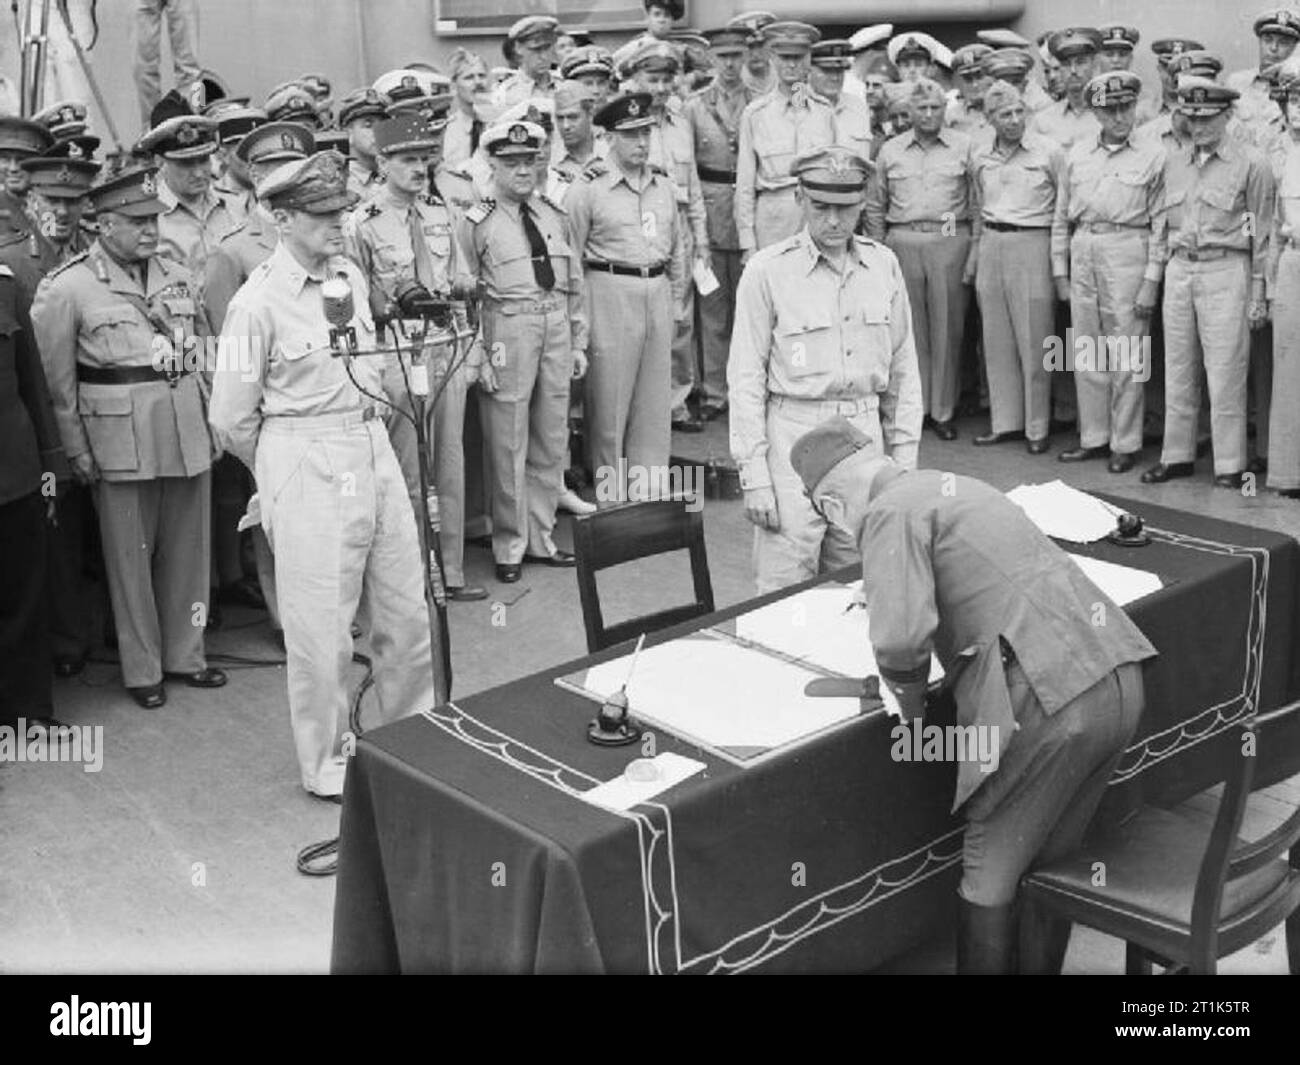 Japanese Surrender at Tokyo Bay, 2 September 1945 General Umezu Yoshijiro signs the surrender on behalf of the Imperial Japanese Army on board USS MISSOURI in Tokyo Bay. Stock Photo